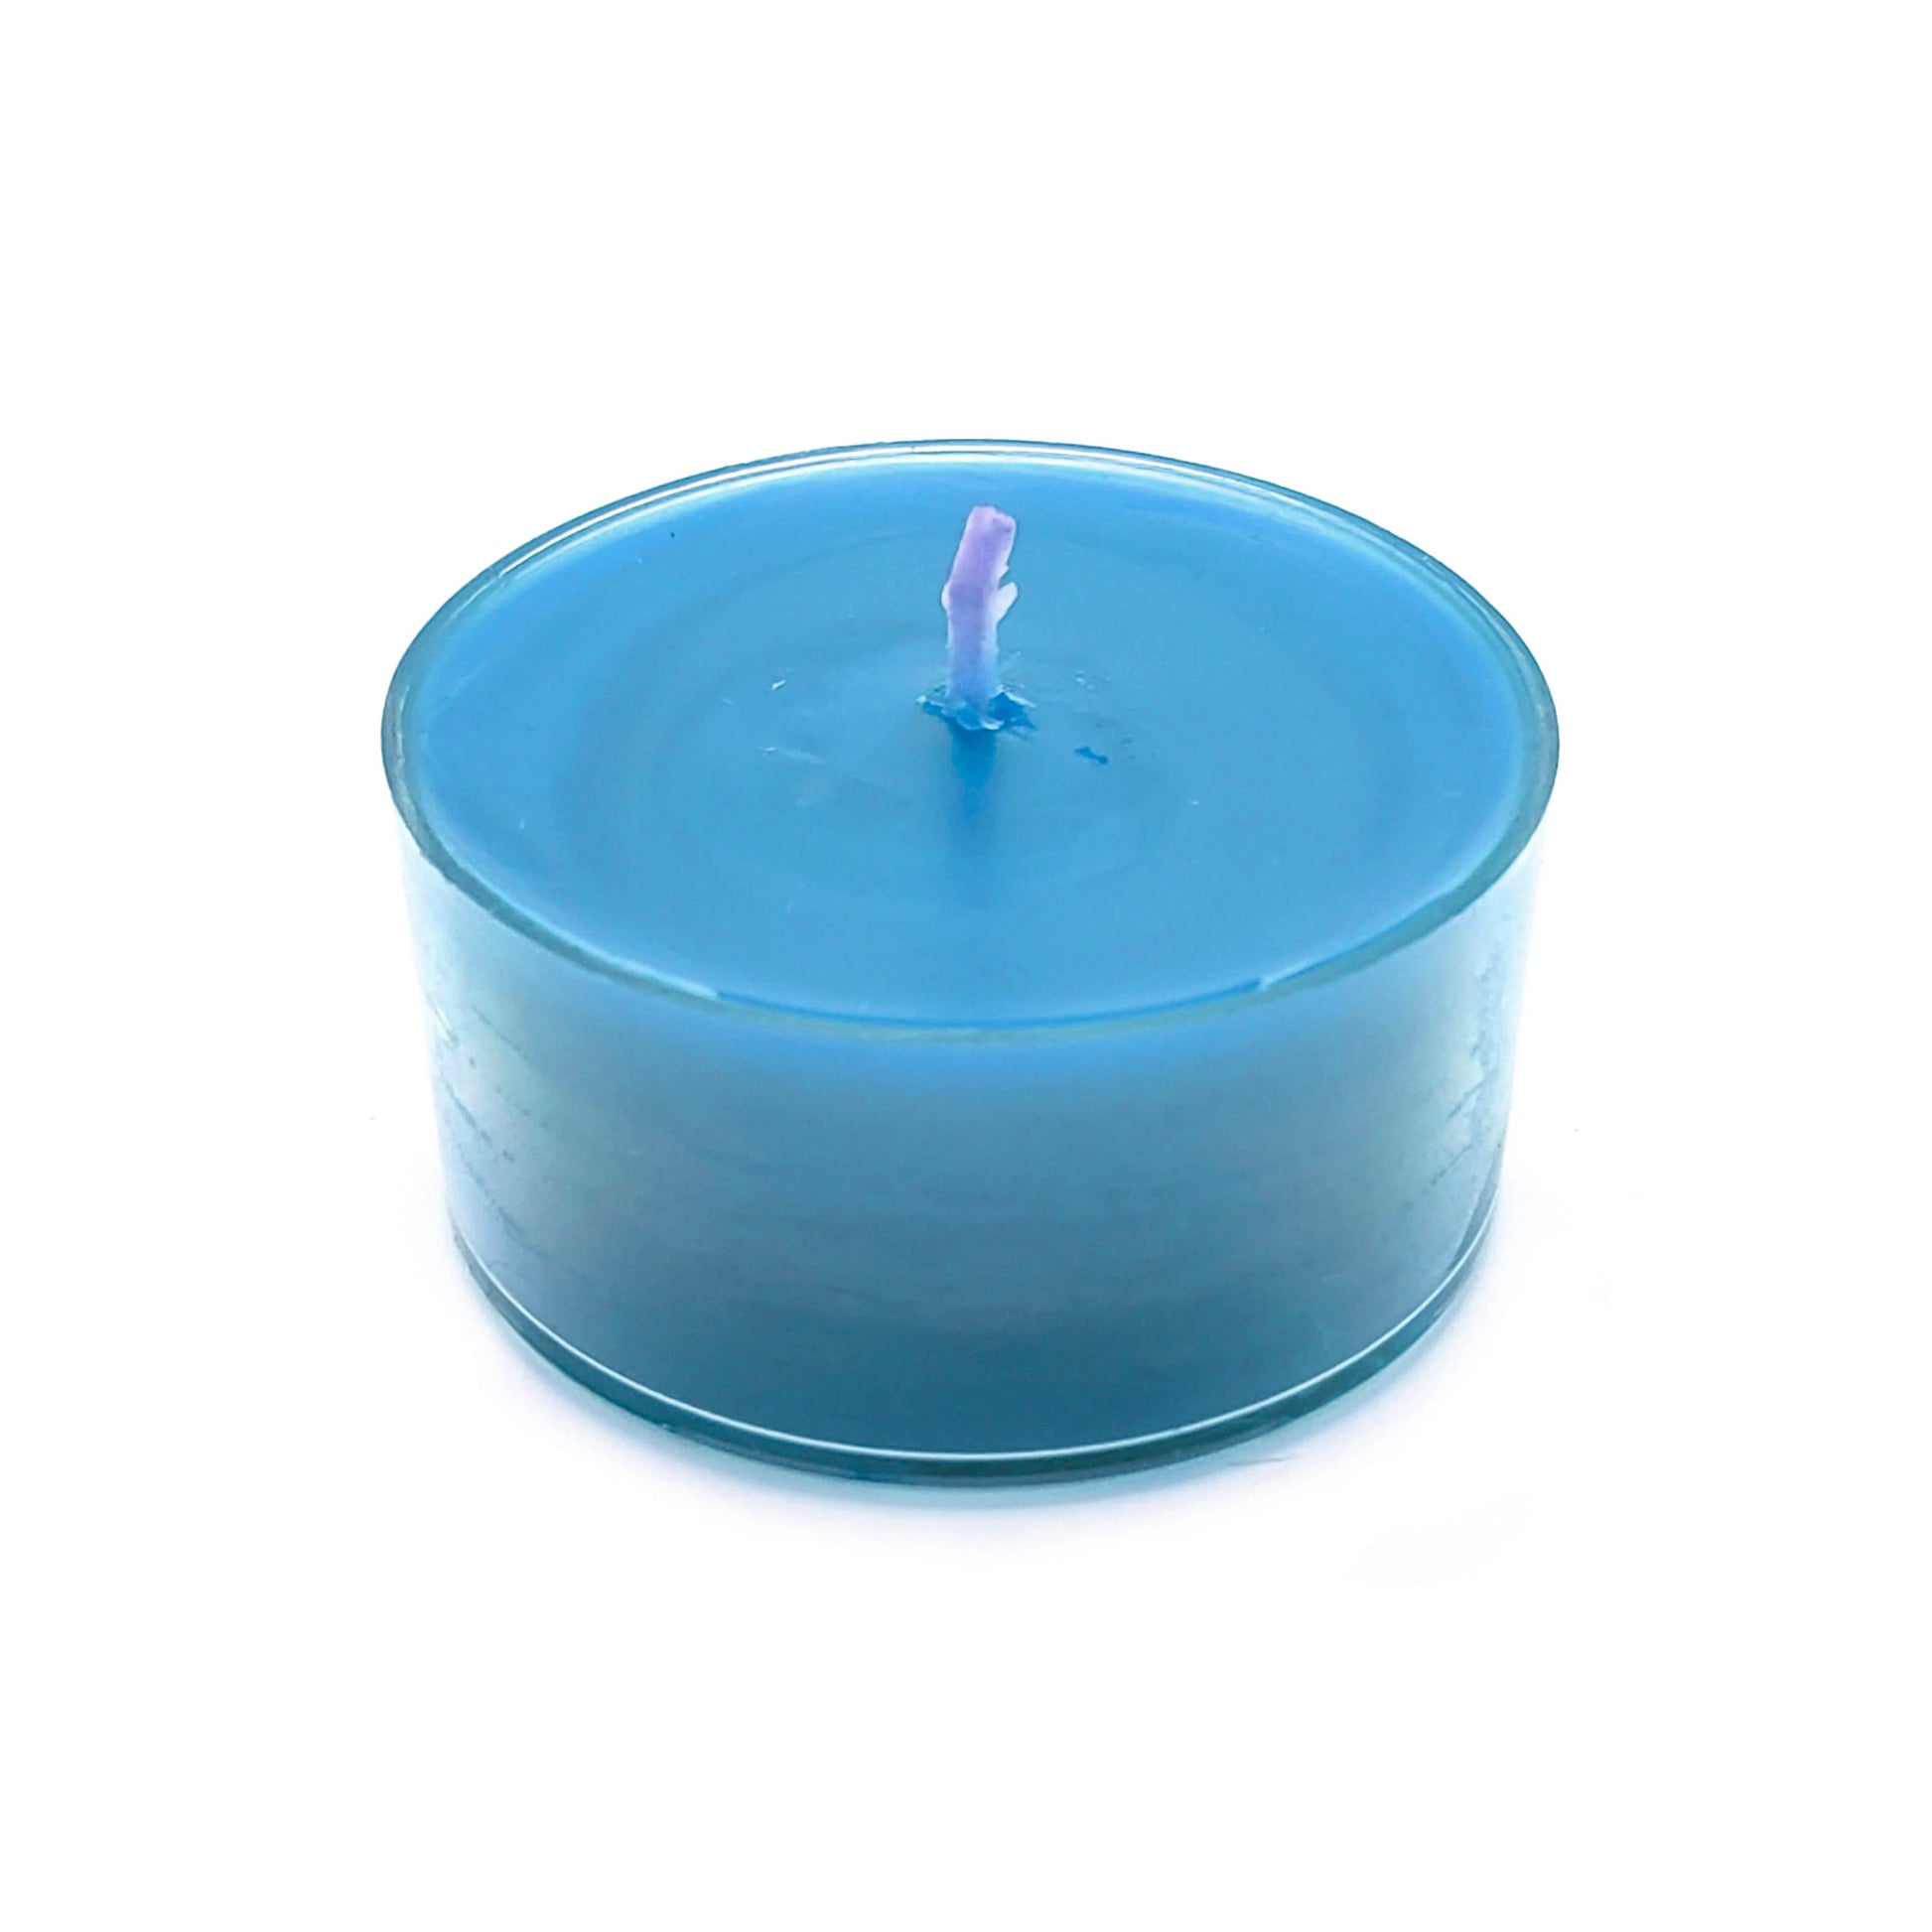 Coastal Reef Tealights - Scented Candles